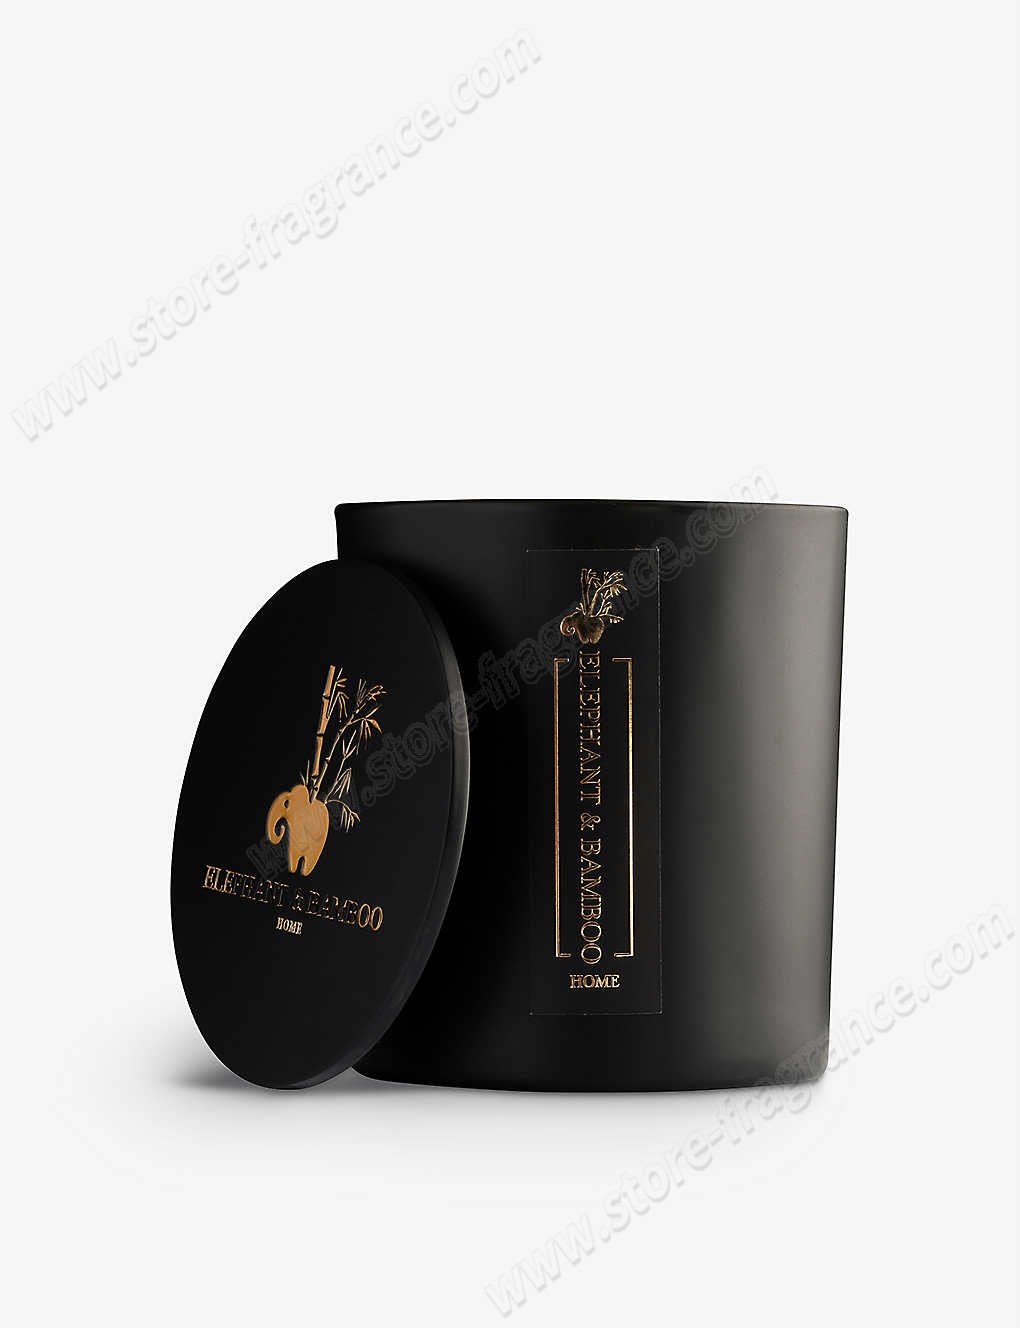 ELEPHANT & BAMBOO/Royal Oud scented candle 300g ✿ Discount Store - -0